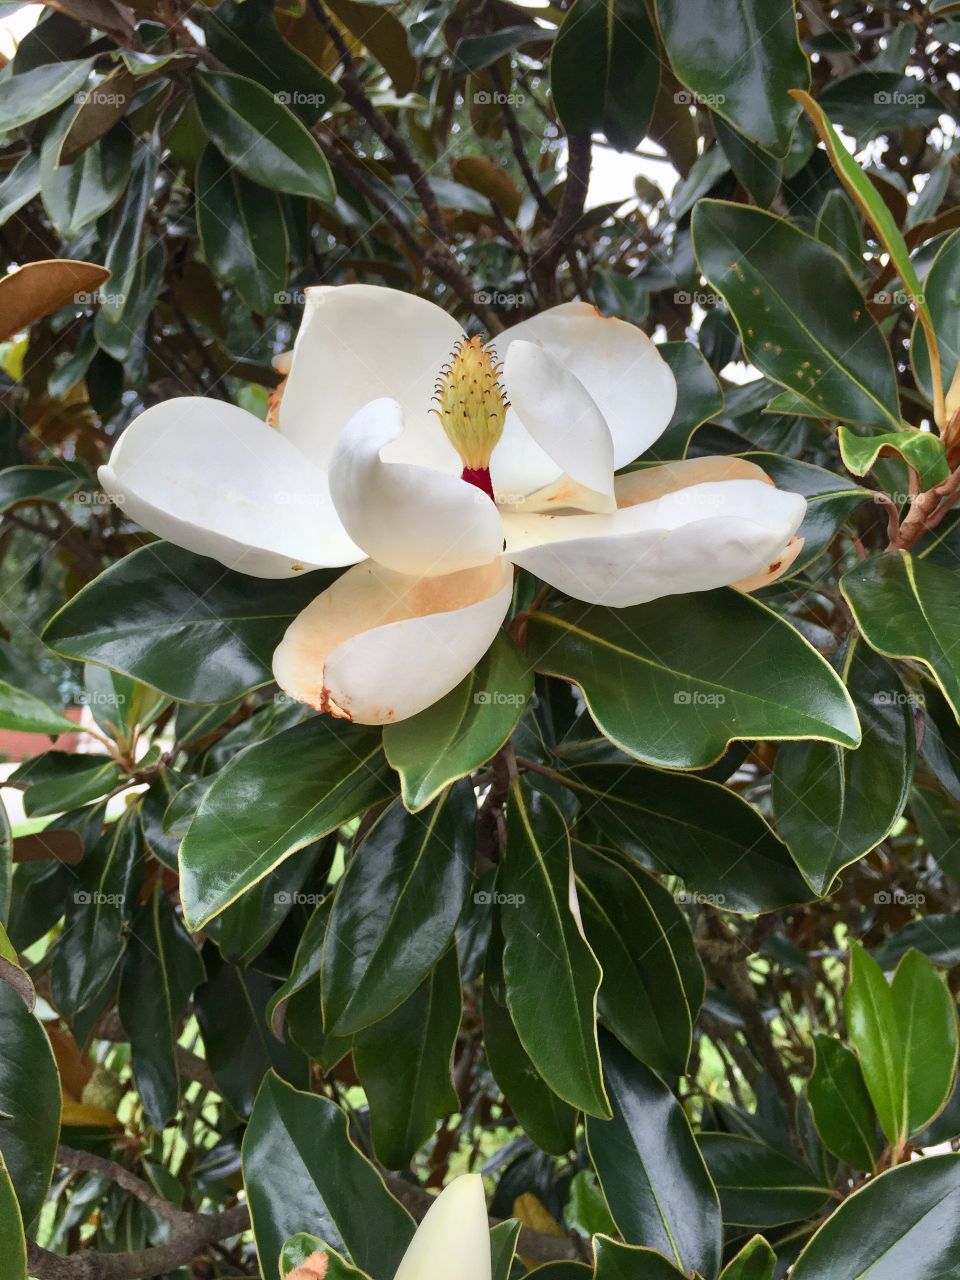 Magnolia tree ,campground in Tennessee . Never saw or smelled one up close an personal 